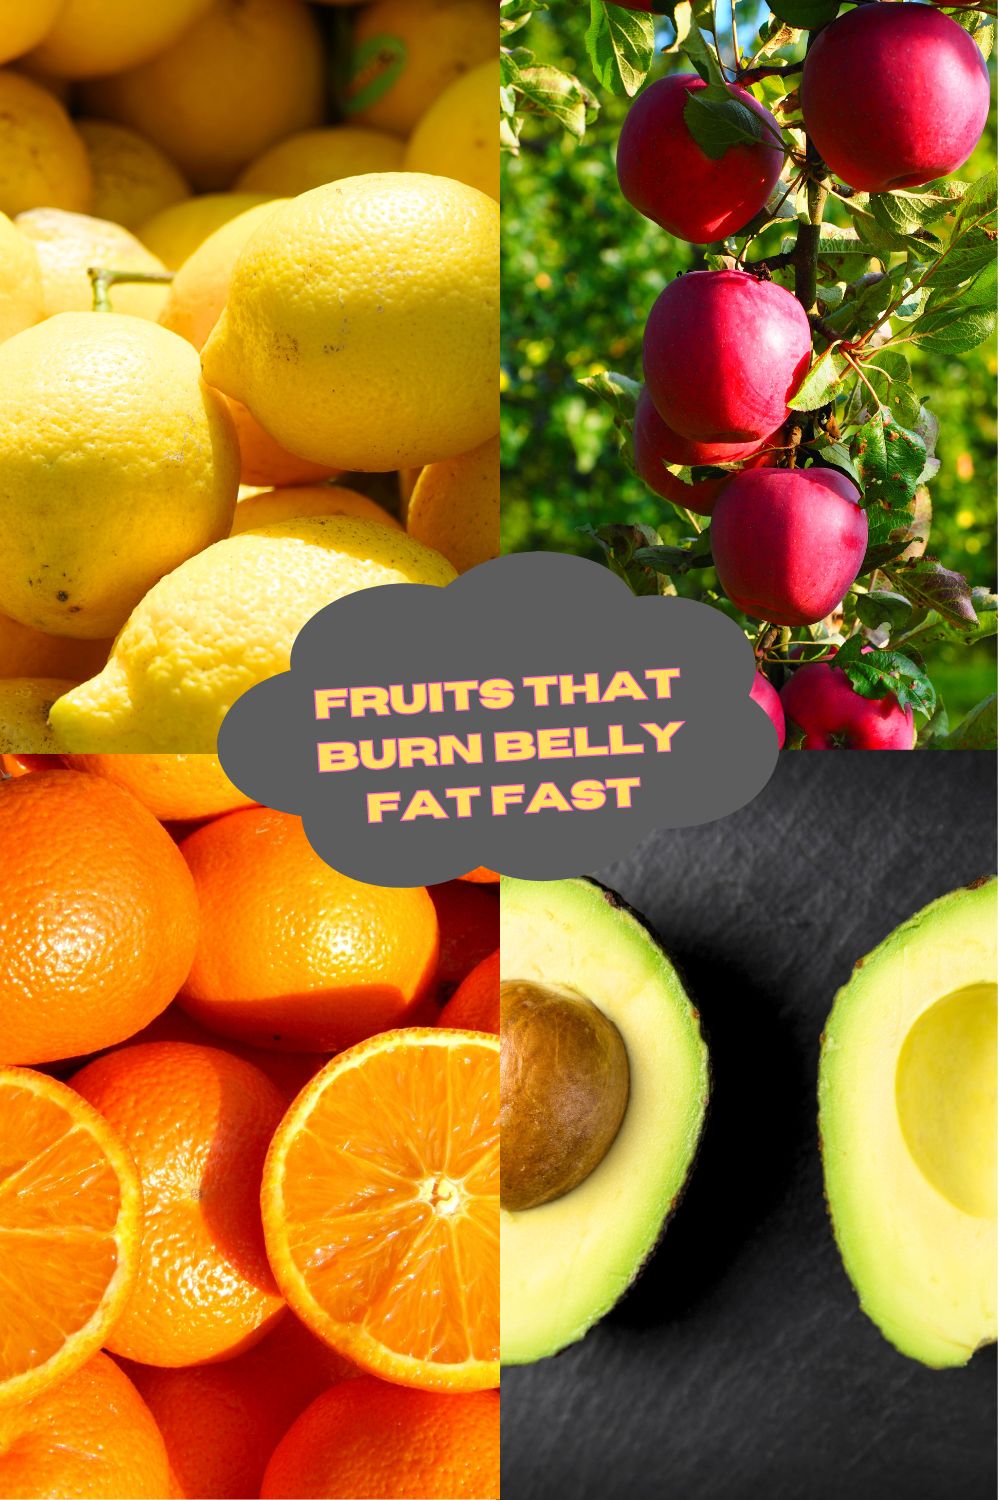 32 Foods That Burn Belly Fat Fast